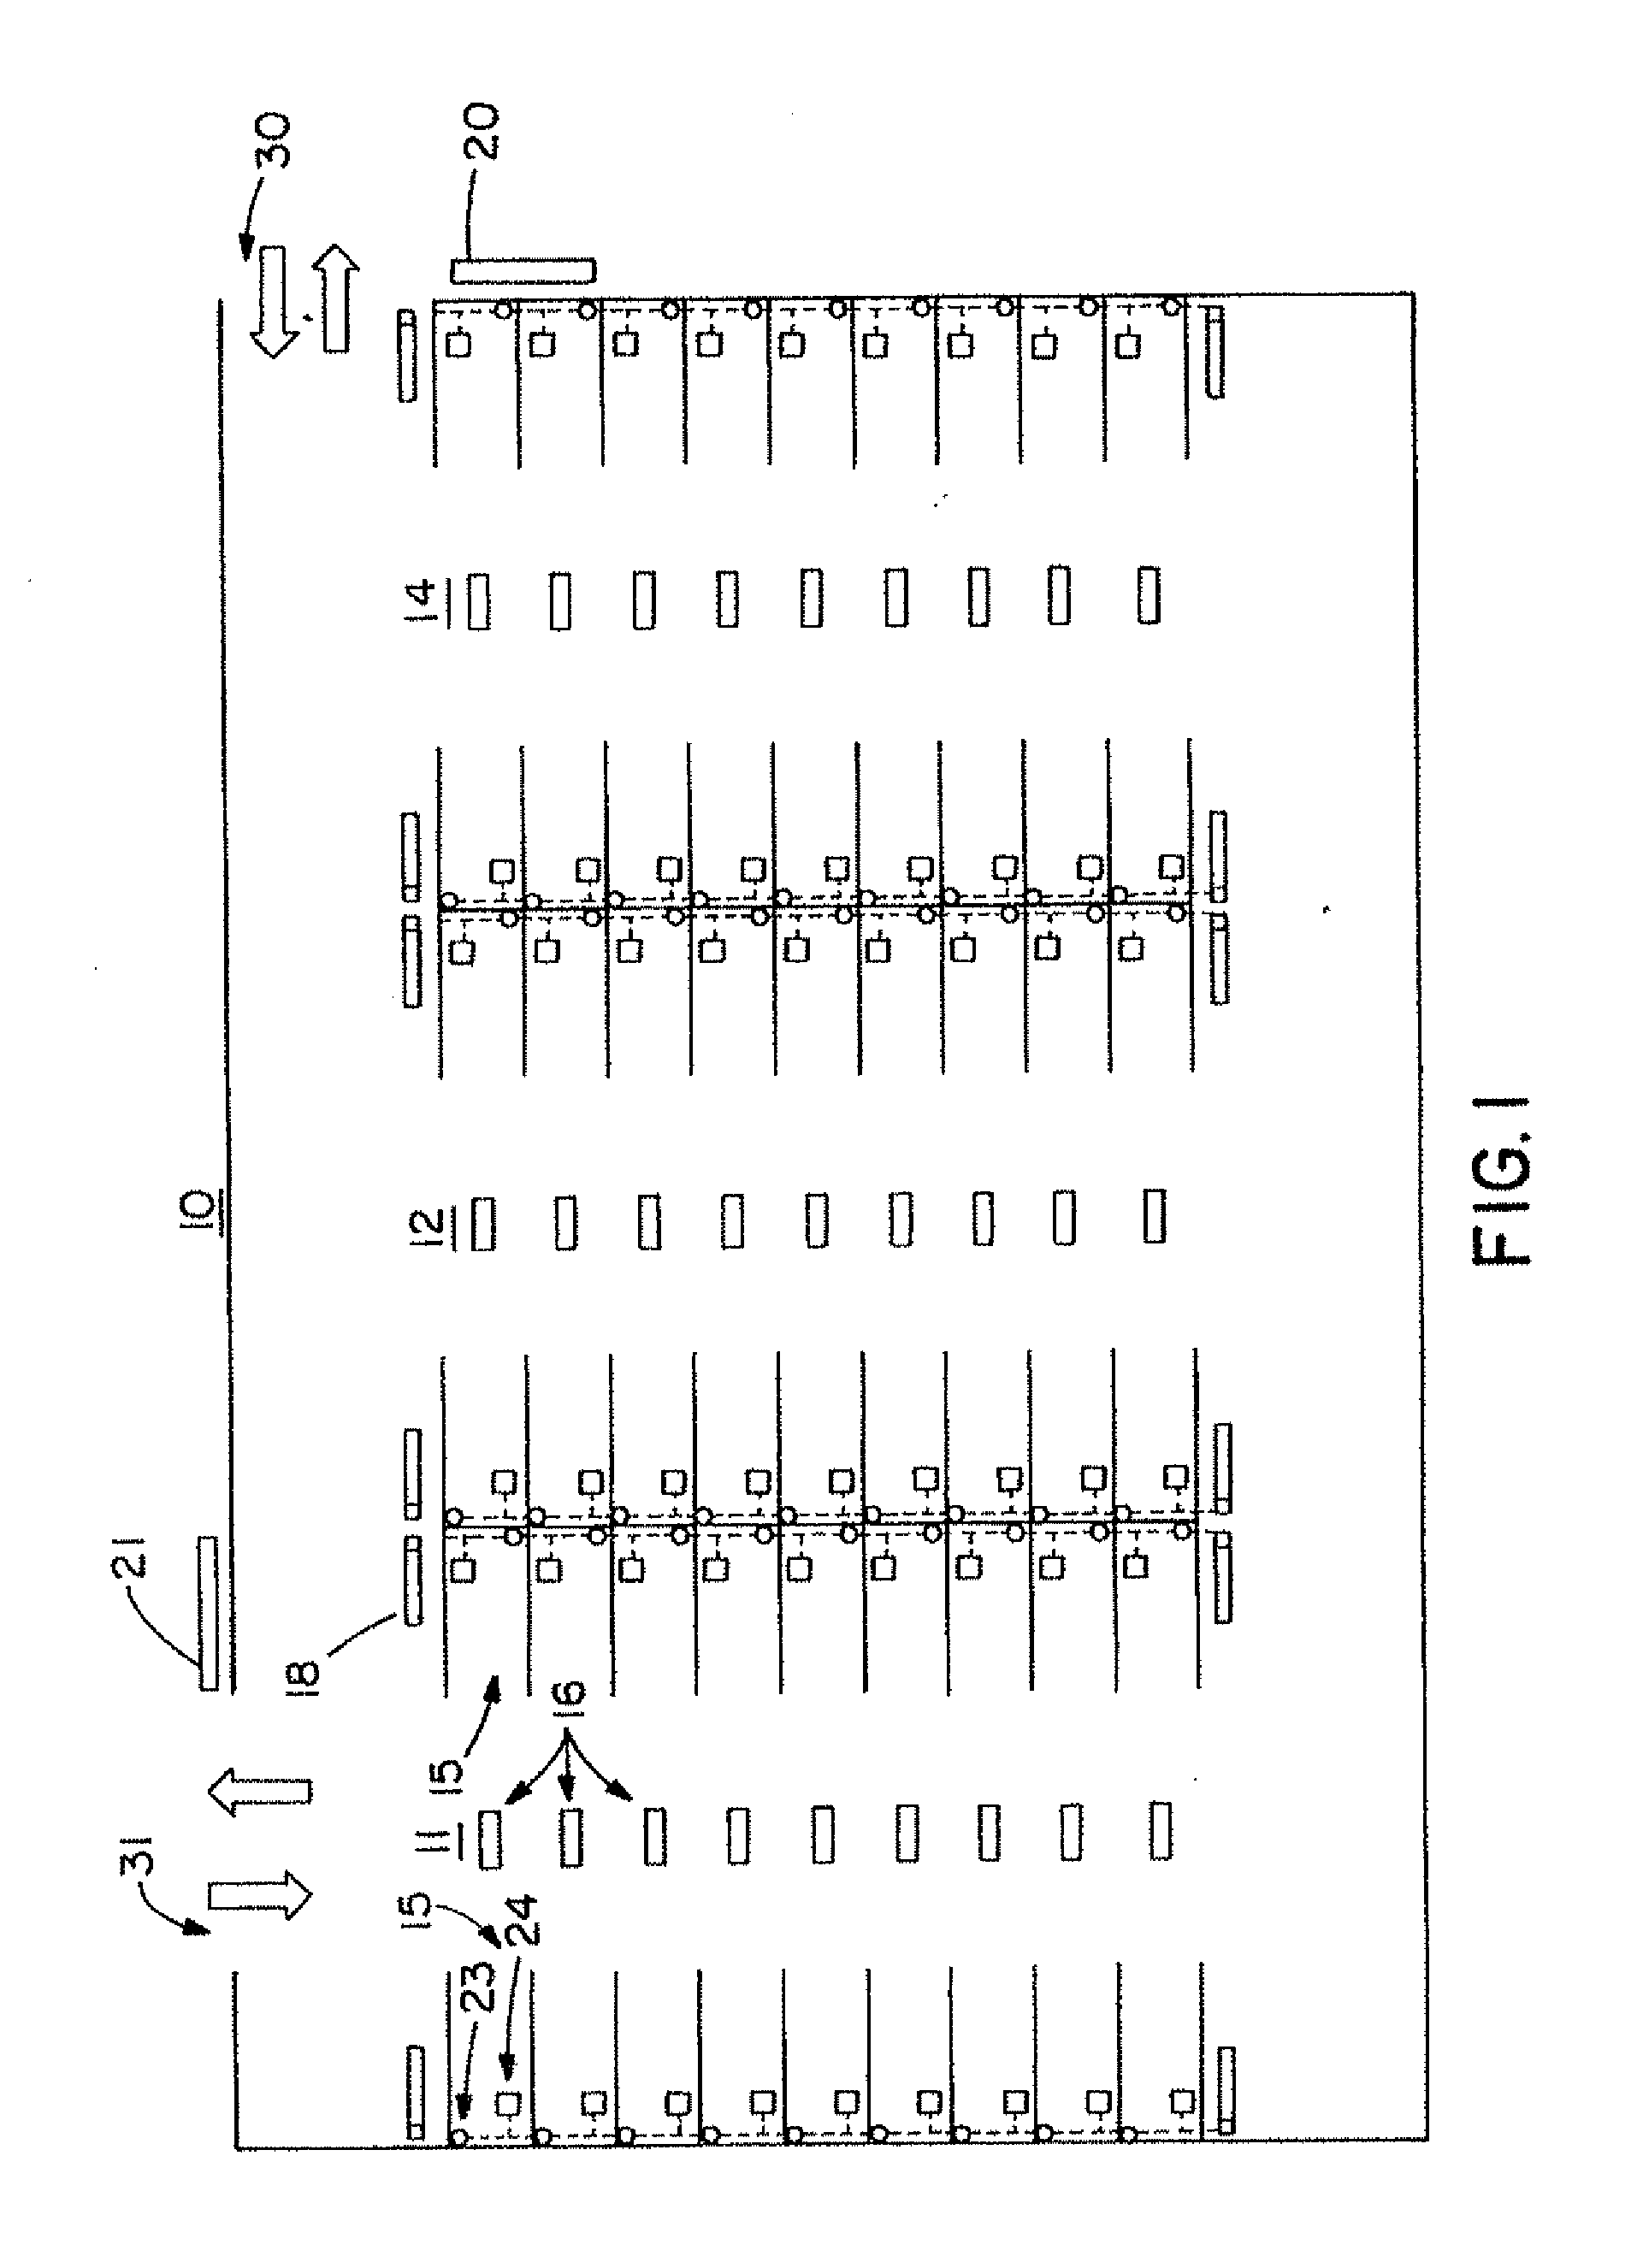 Method and system for managing a parking lot based on intelligent imaging